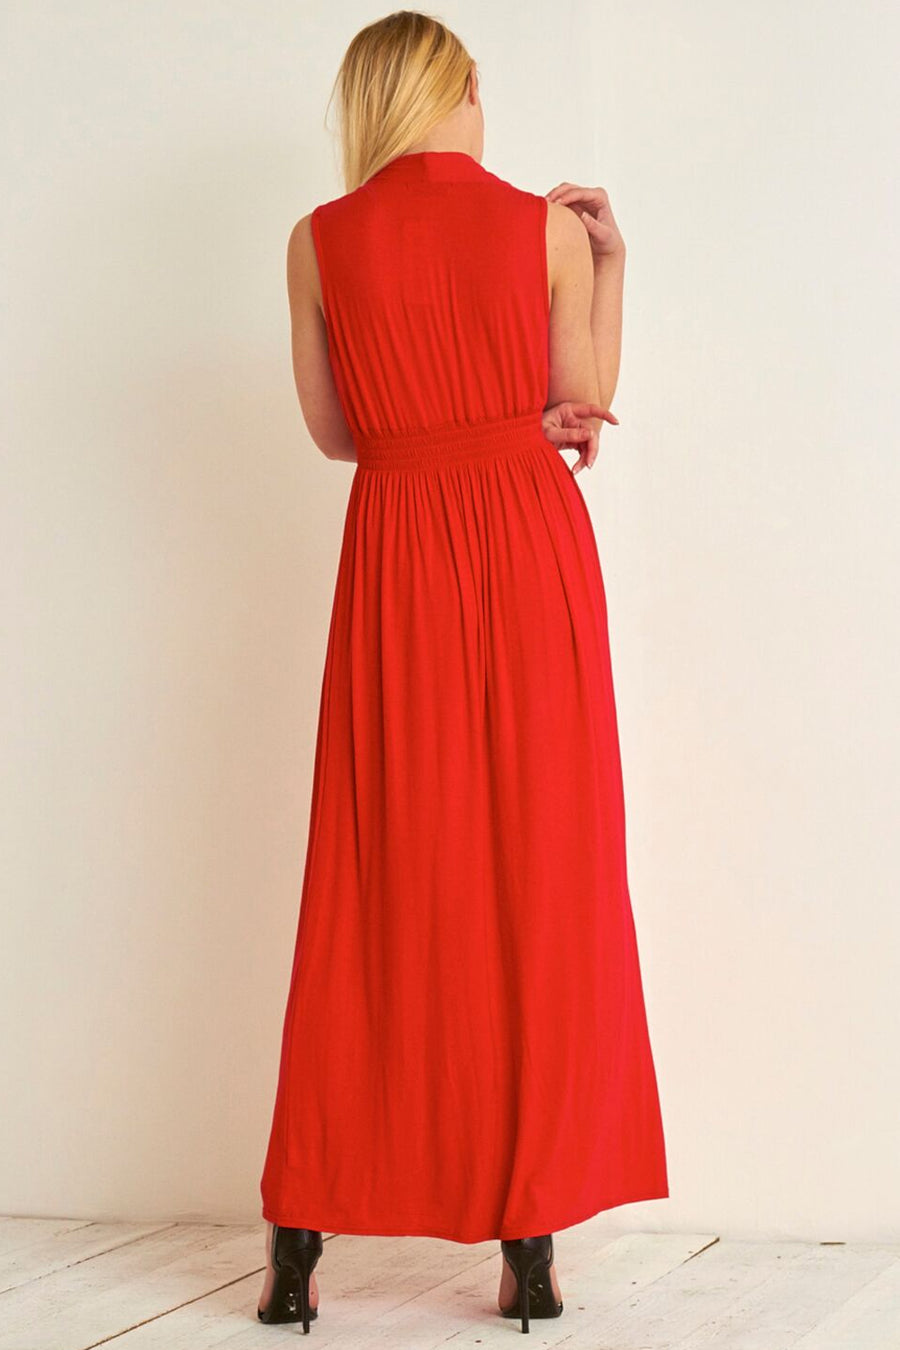 Chunky Strap Plunge Neck Red Maxi Dress - bejealous-com